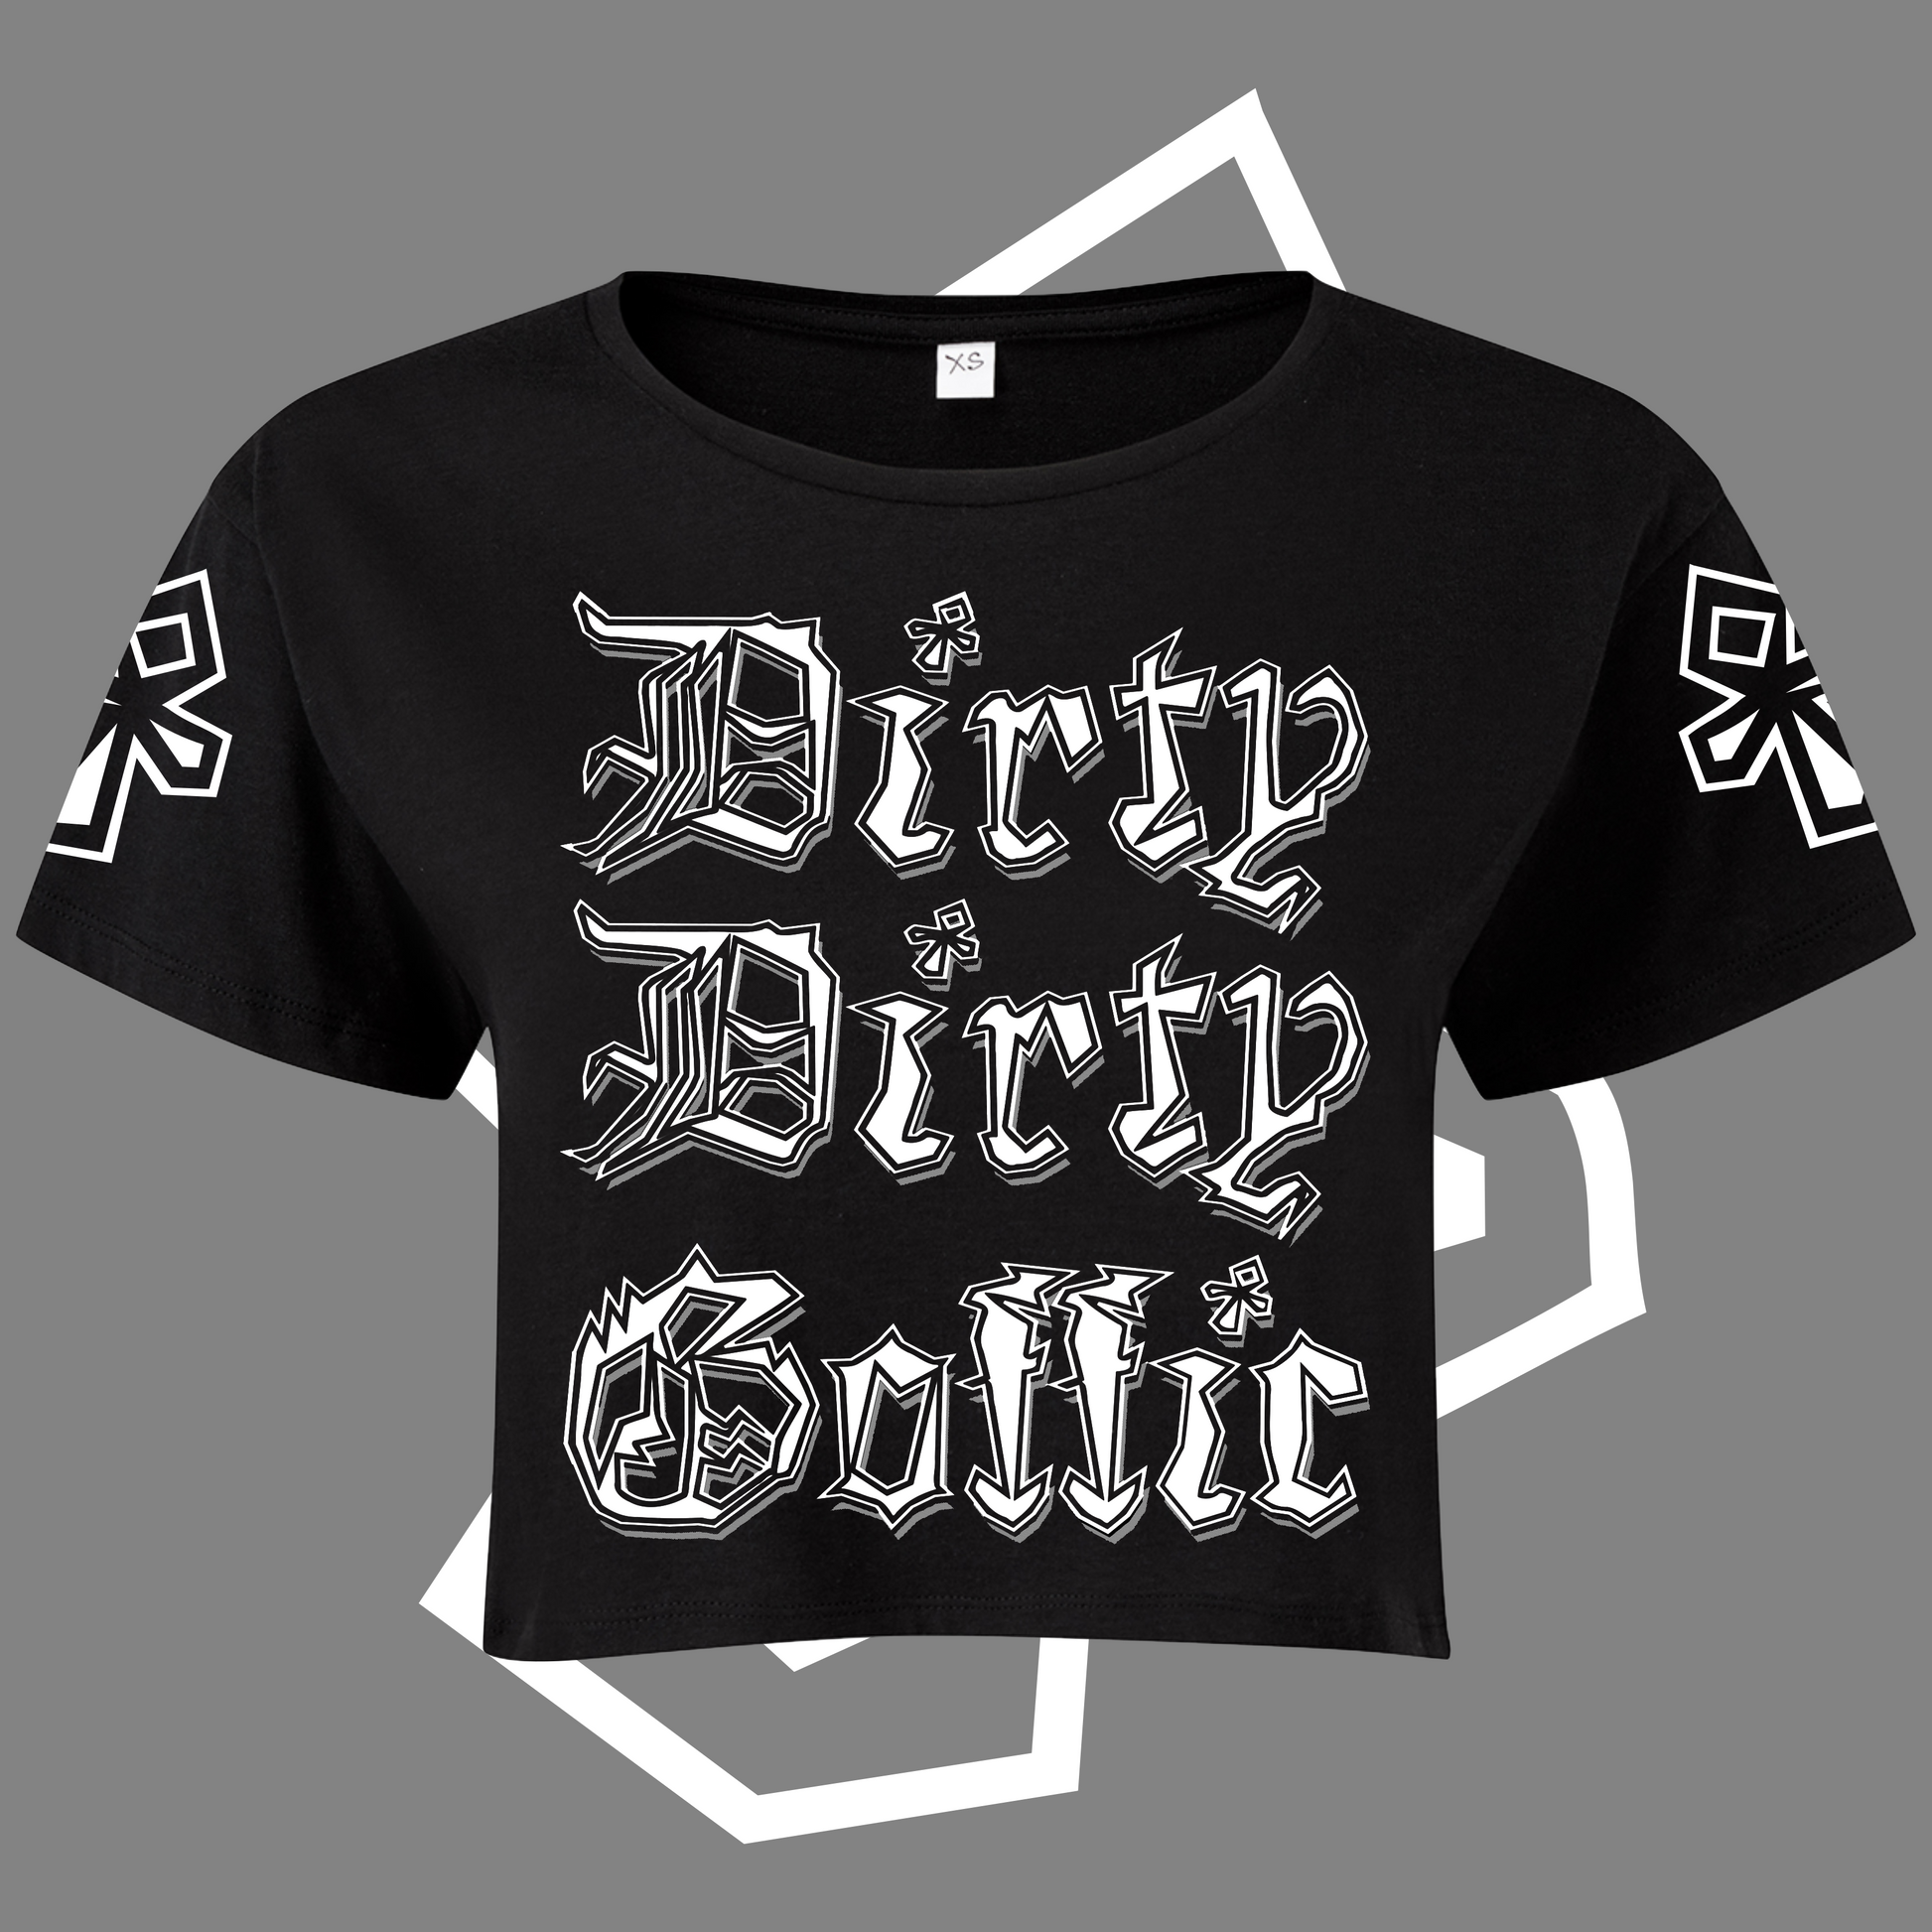 Dirty Dirty Goffic Cropped T-shirt